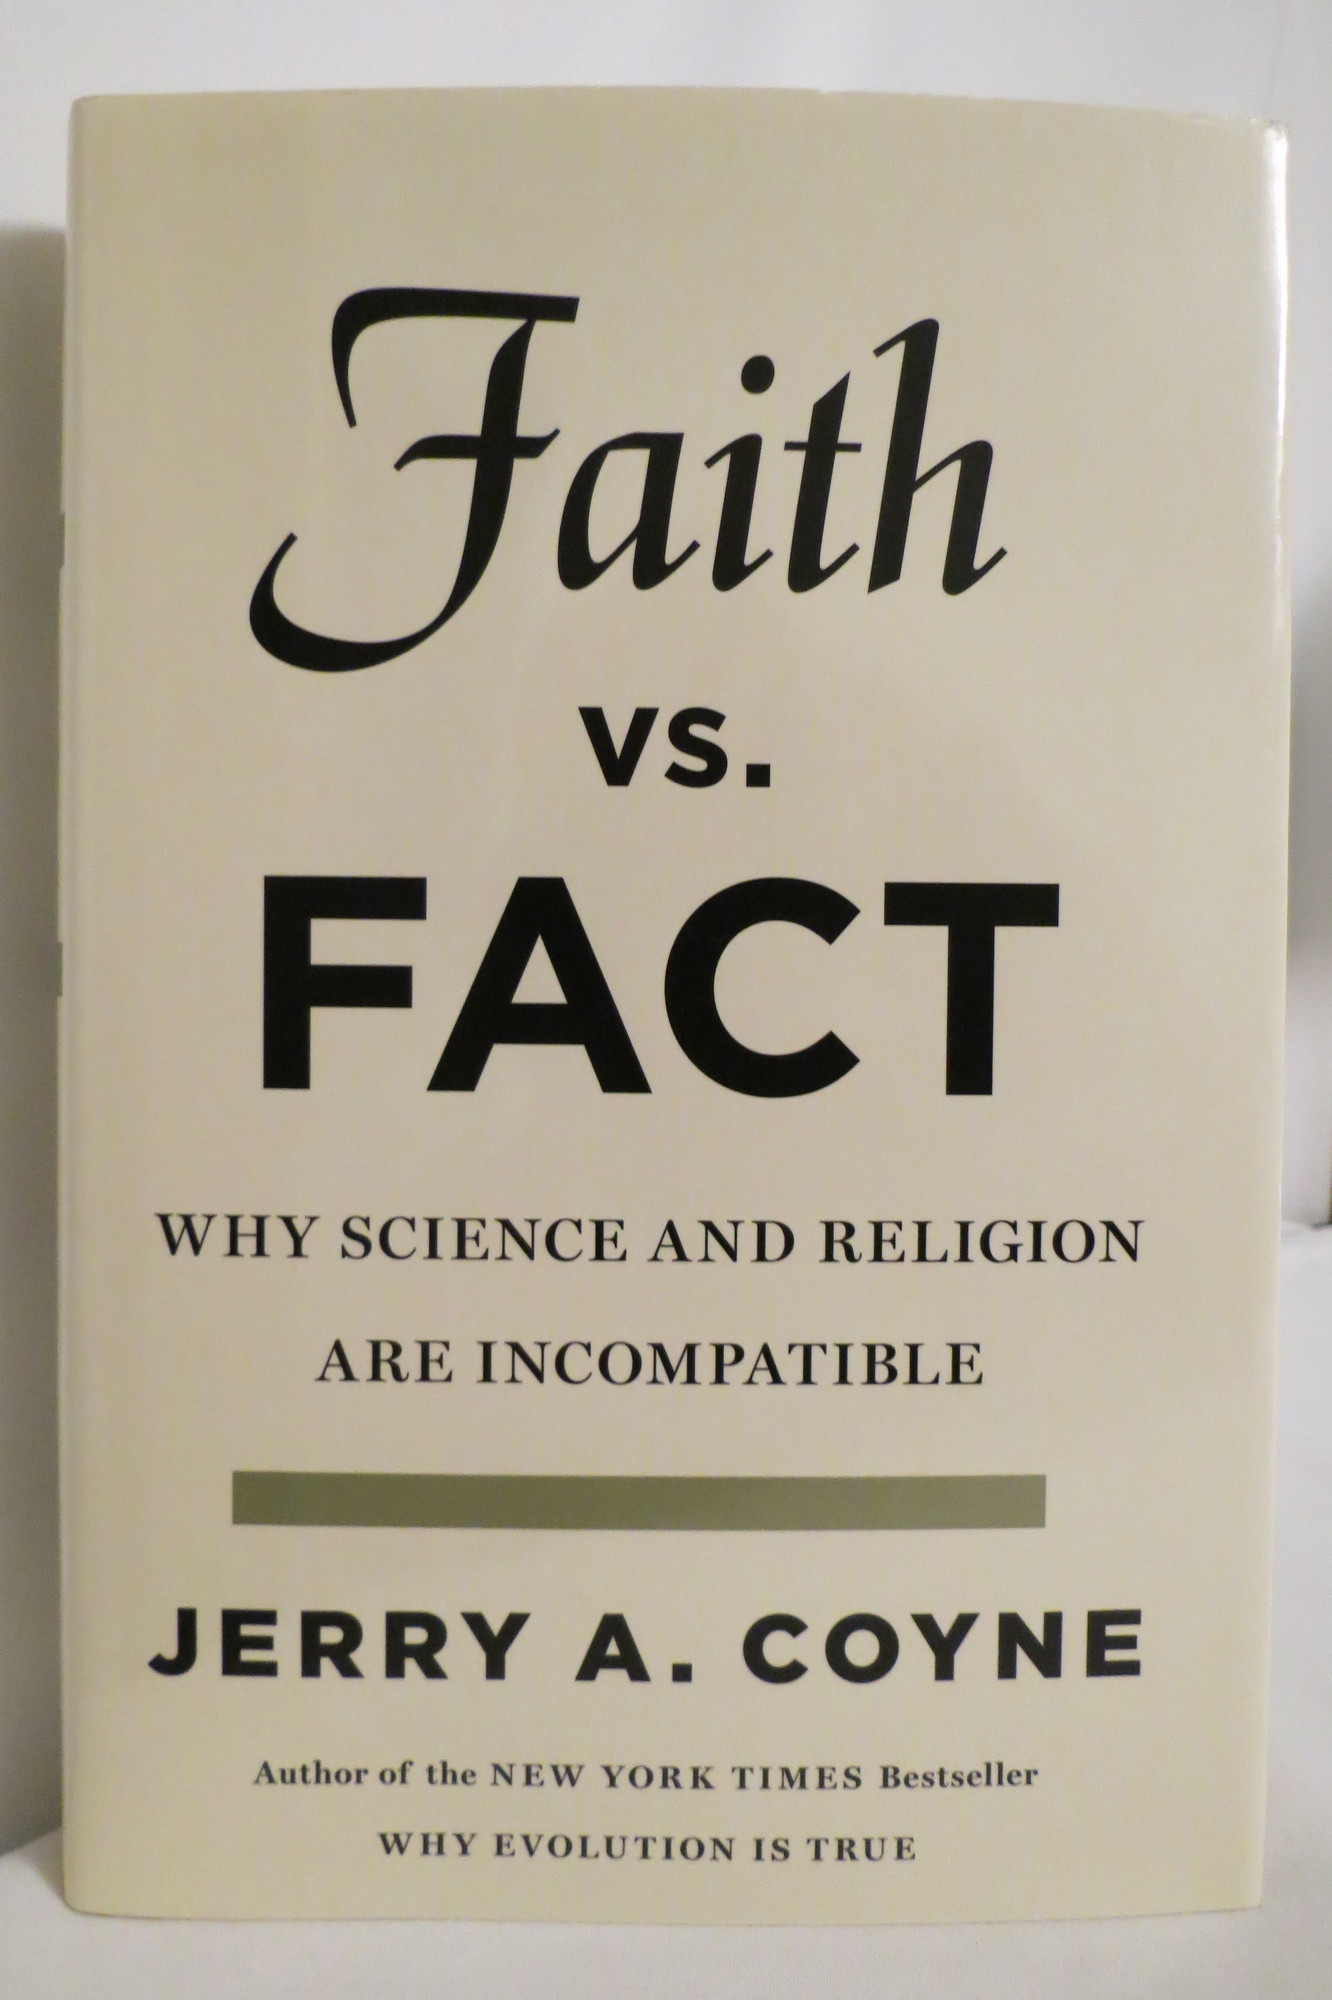 Image for FAITH VERSUS FACT Why Science and Religion Are Incompatible (DJ protected by clear, acid-free mylar cover.) (DJ protected by clear, acid-free mylar cover)